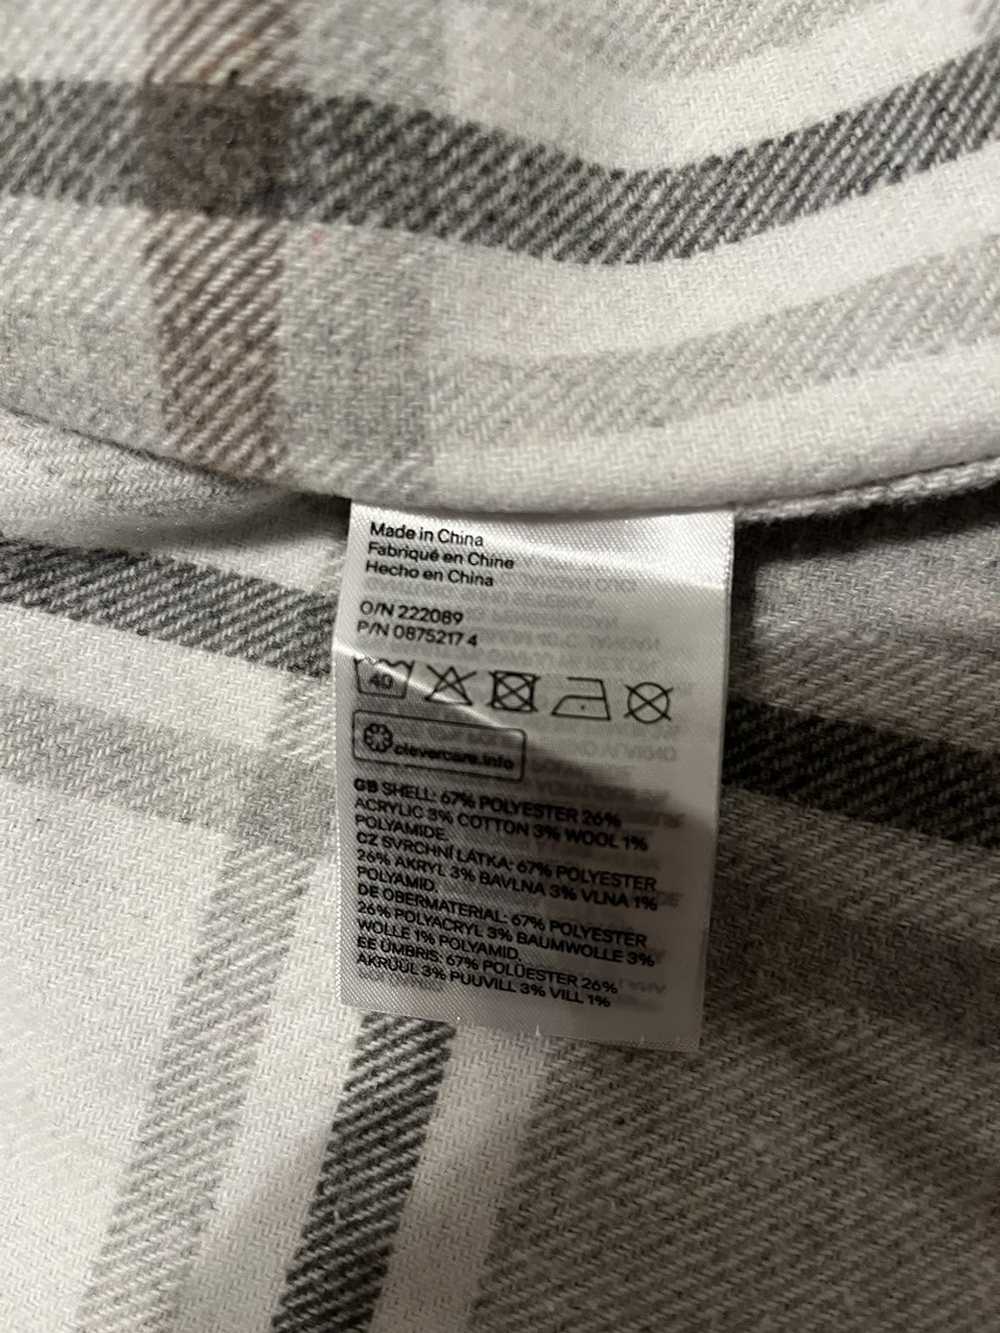 H&M H&M Flannel (White, Grey and tan) - image 3